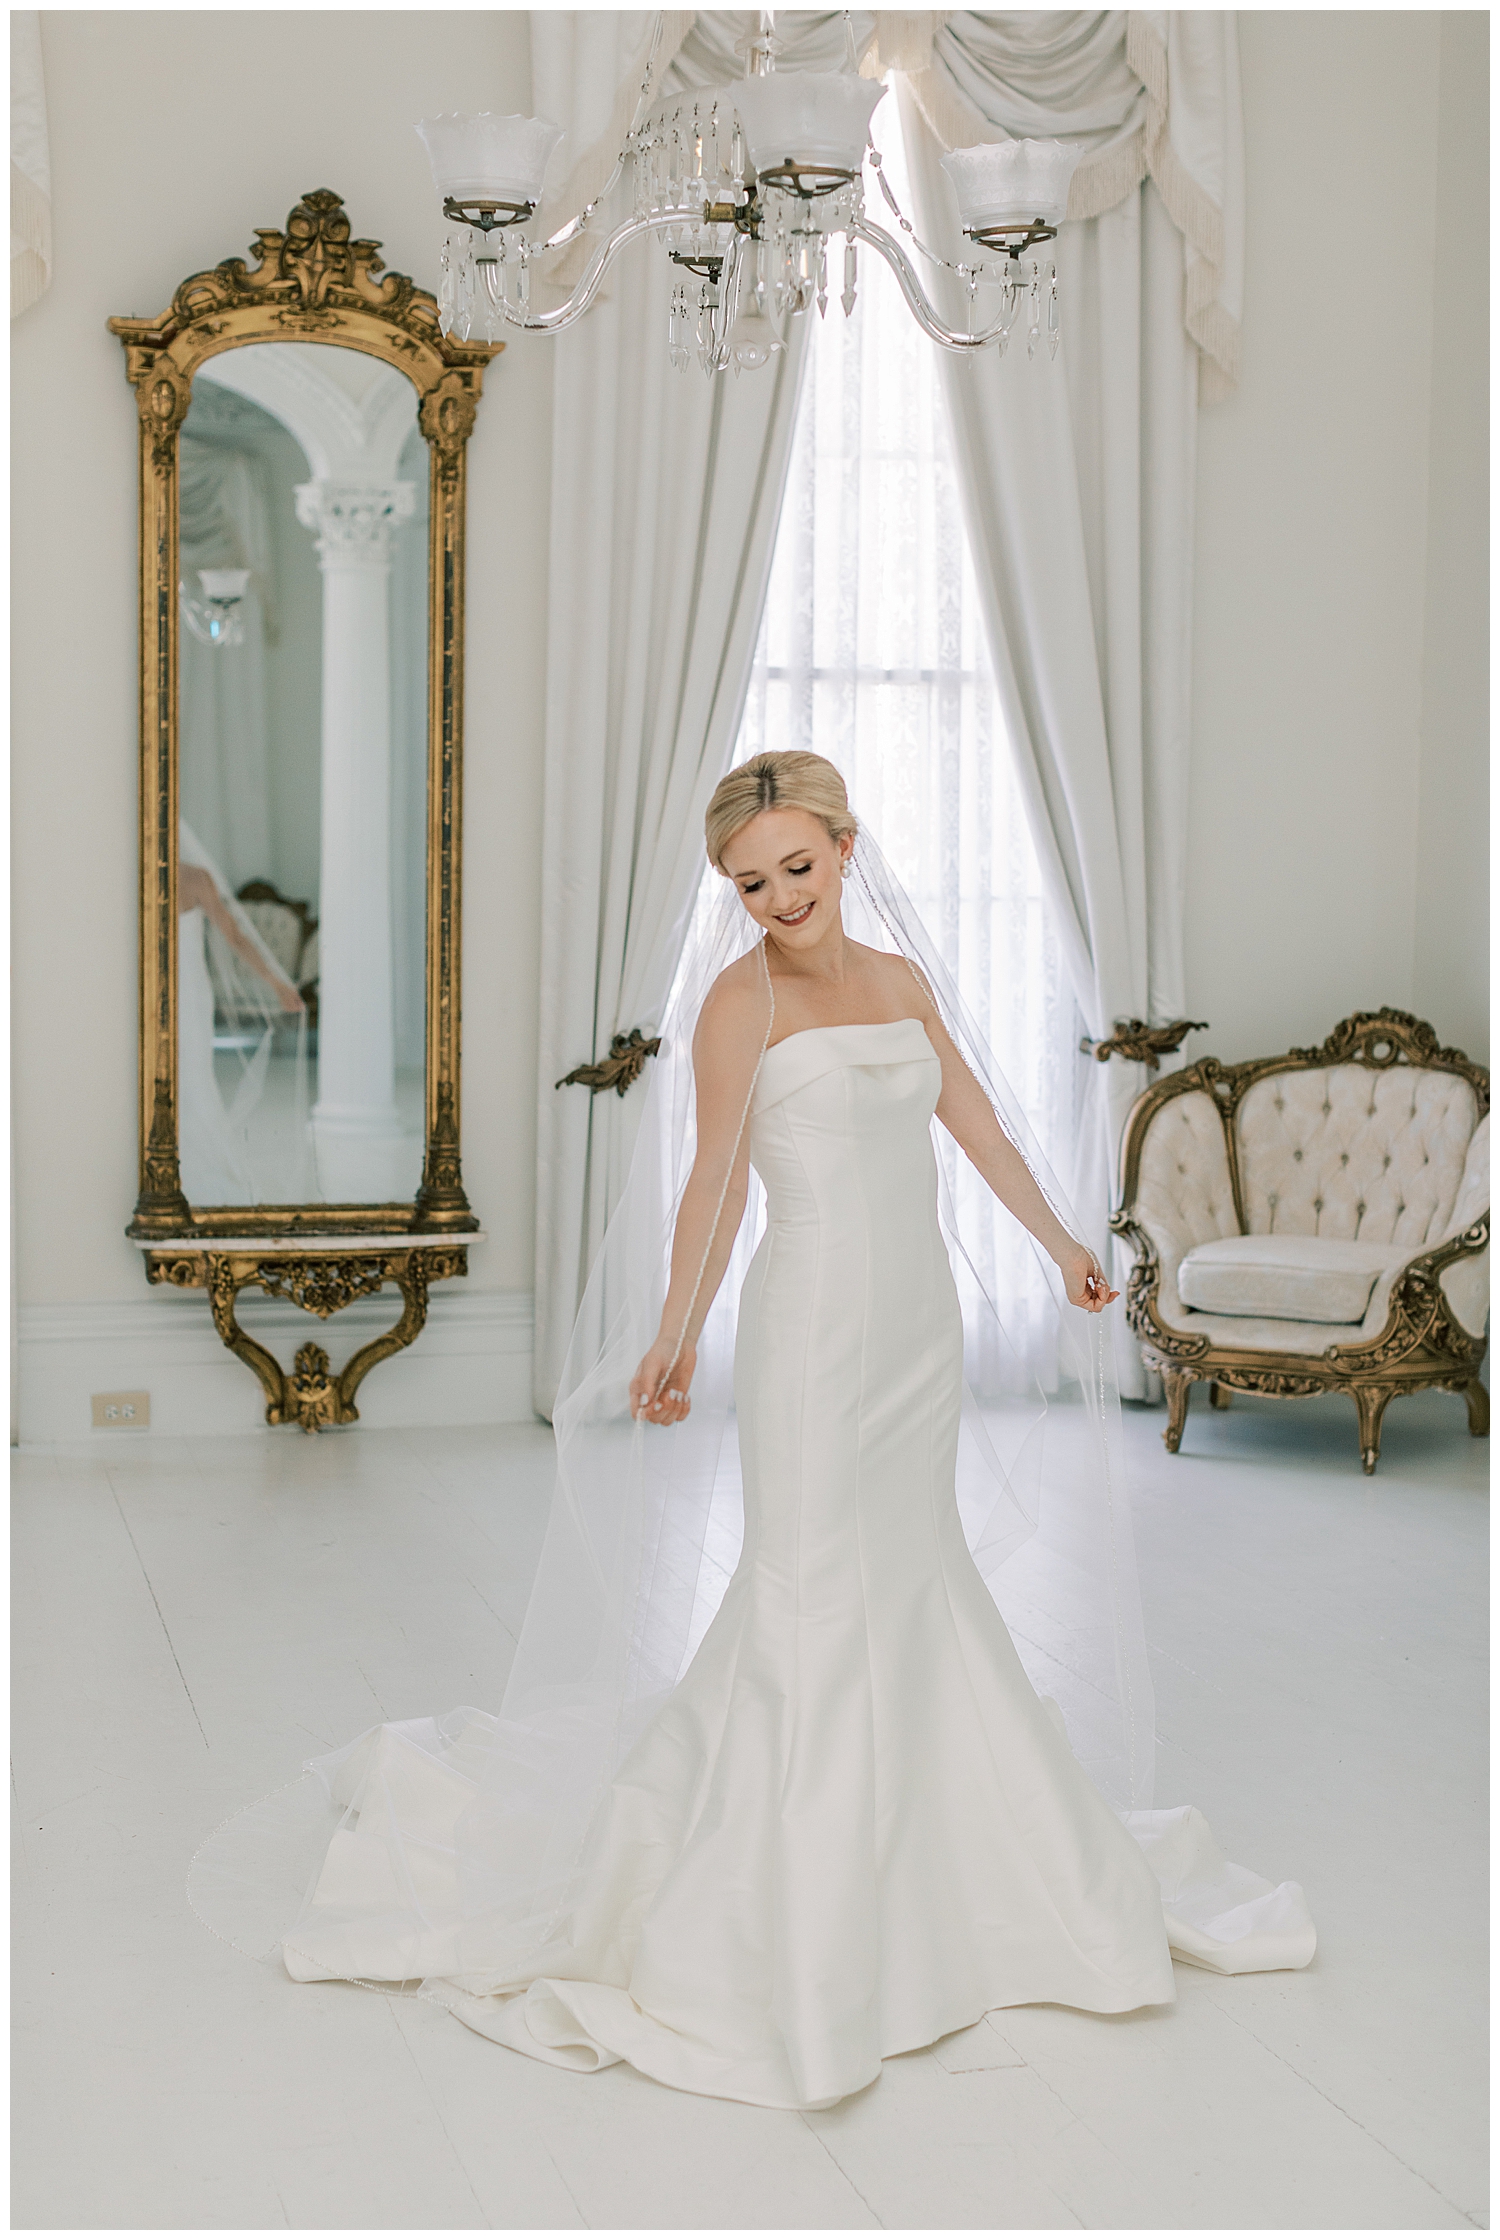 A bride twirls the veil in a white room.